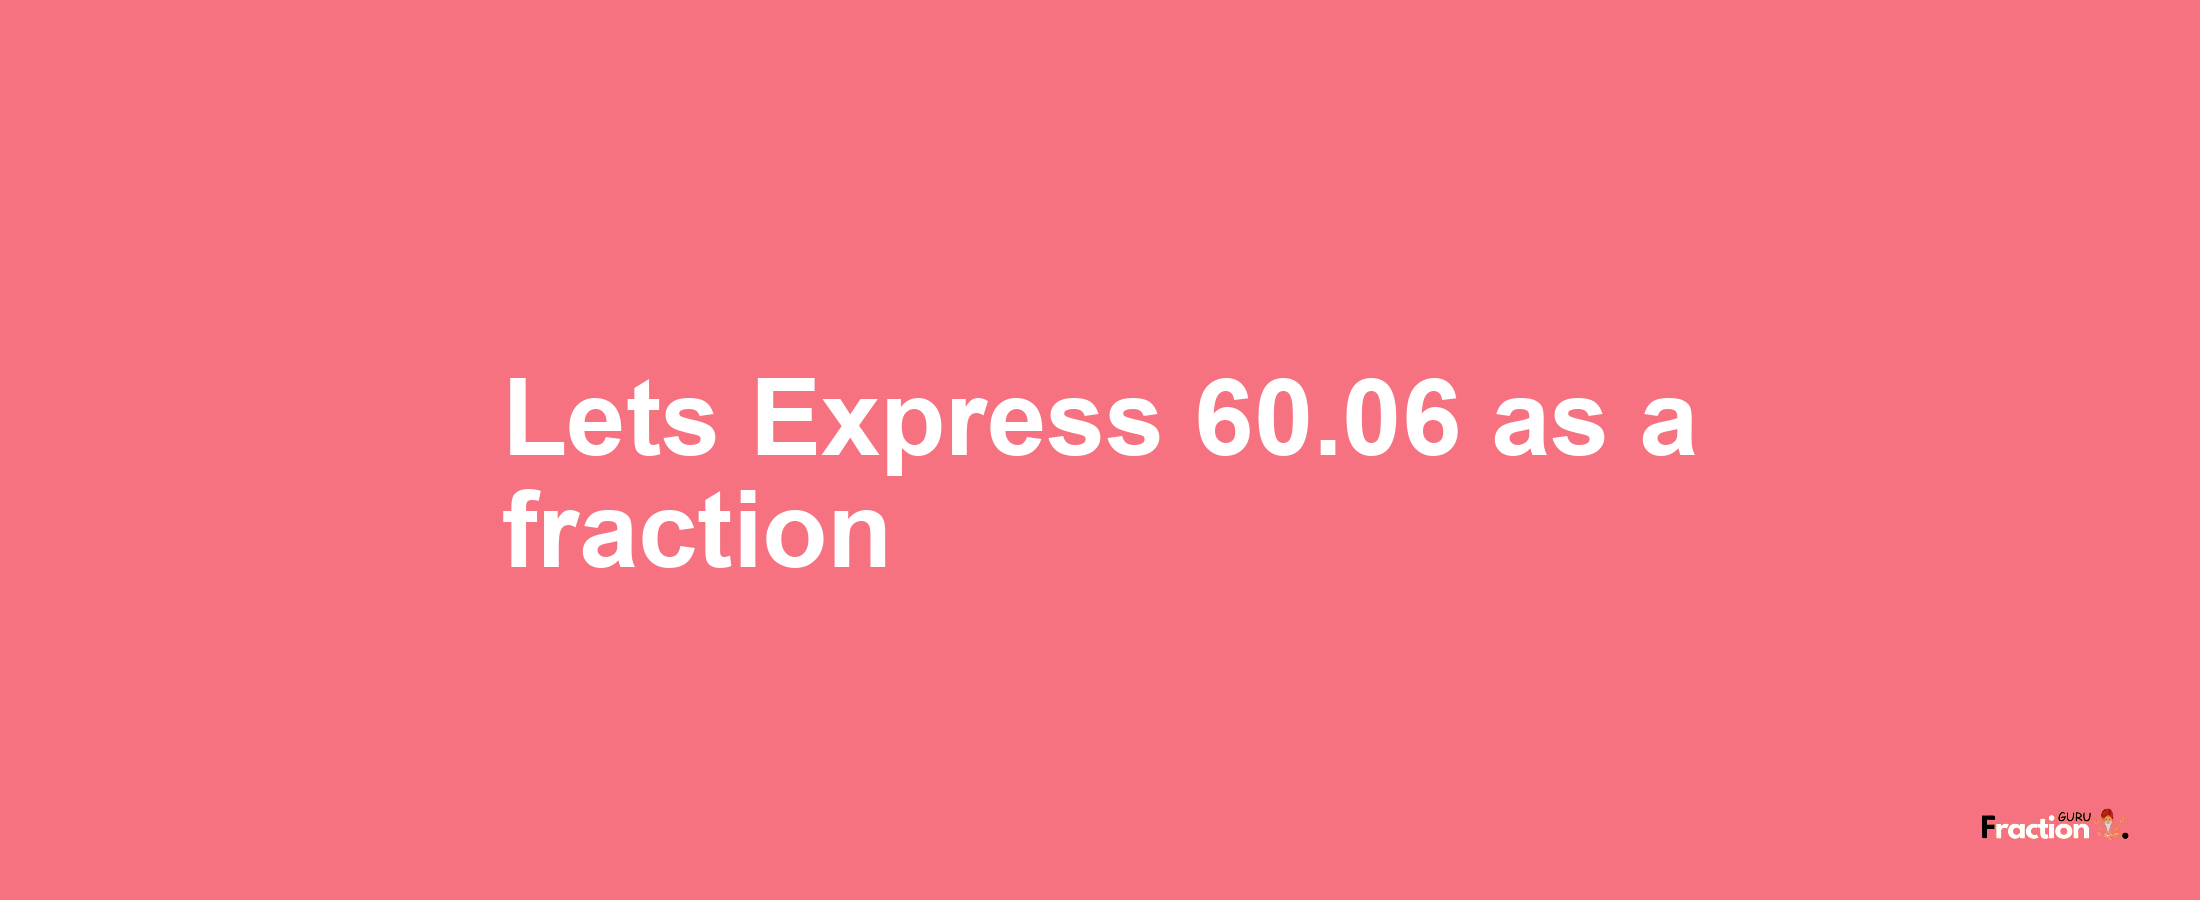 Lets Express 60.06 as afraction